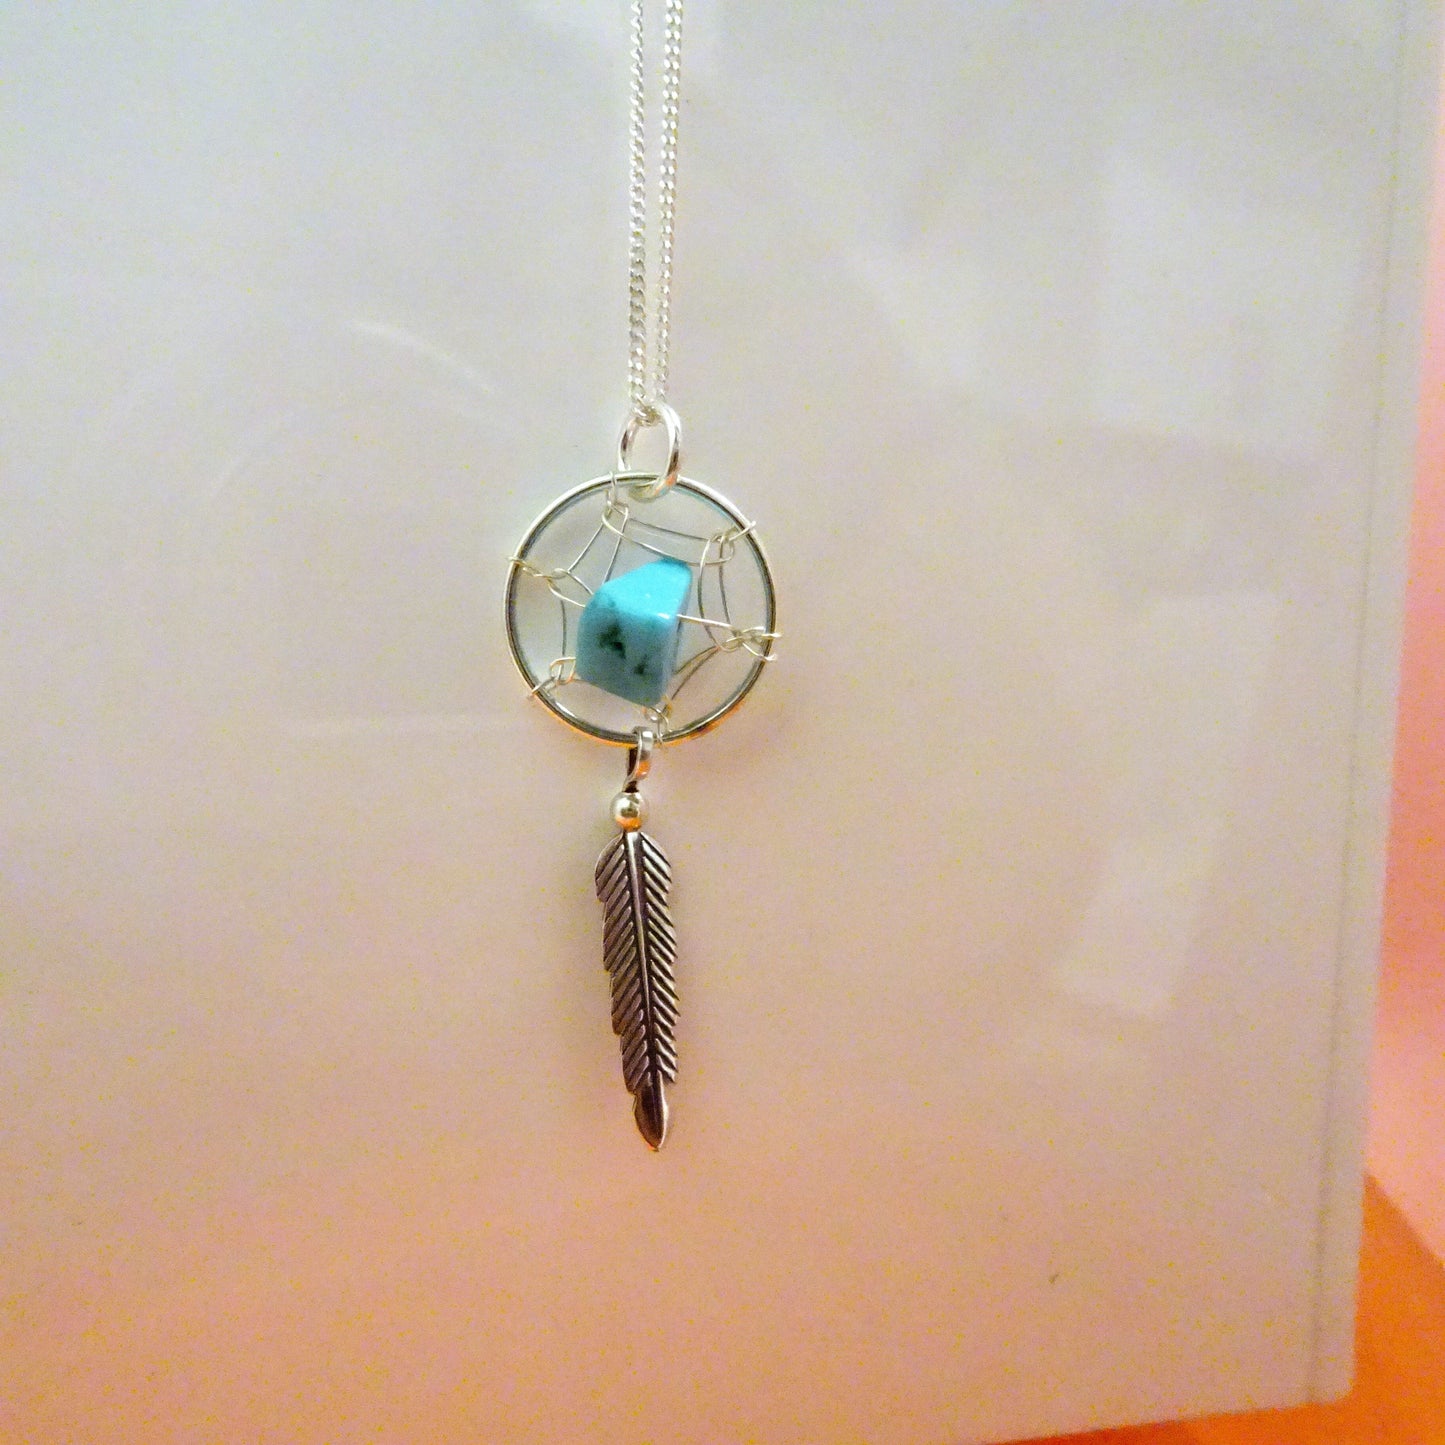 Sterling Silver Dreamcatcher Feather Necklace